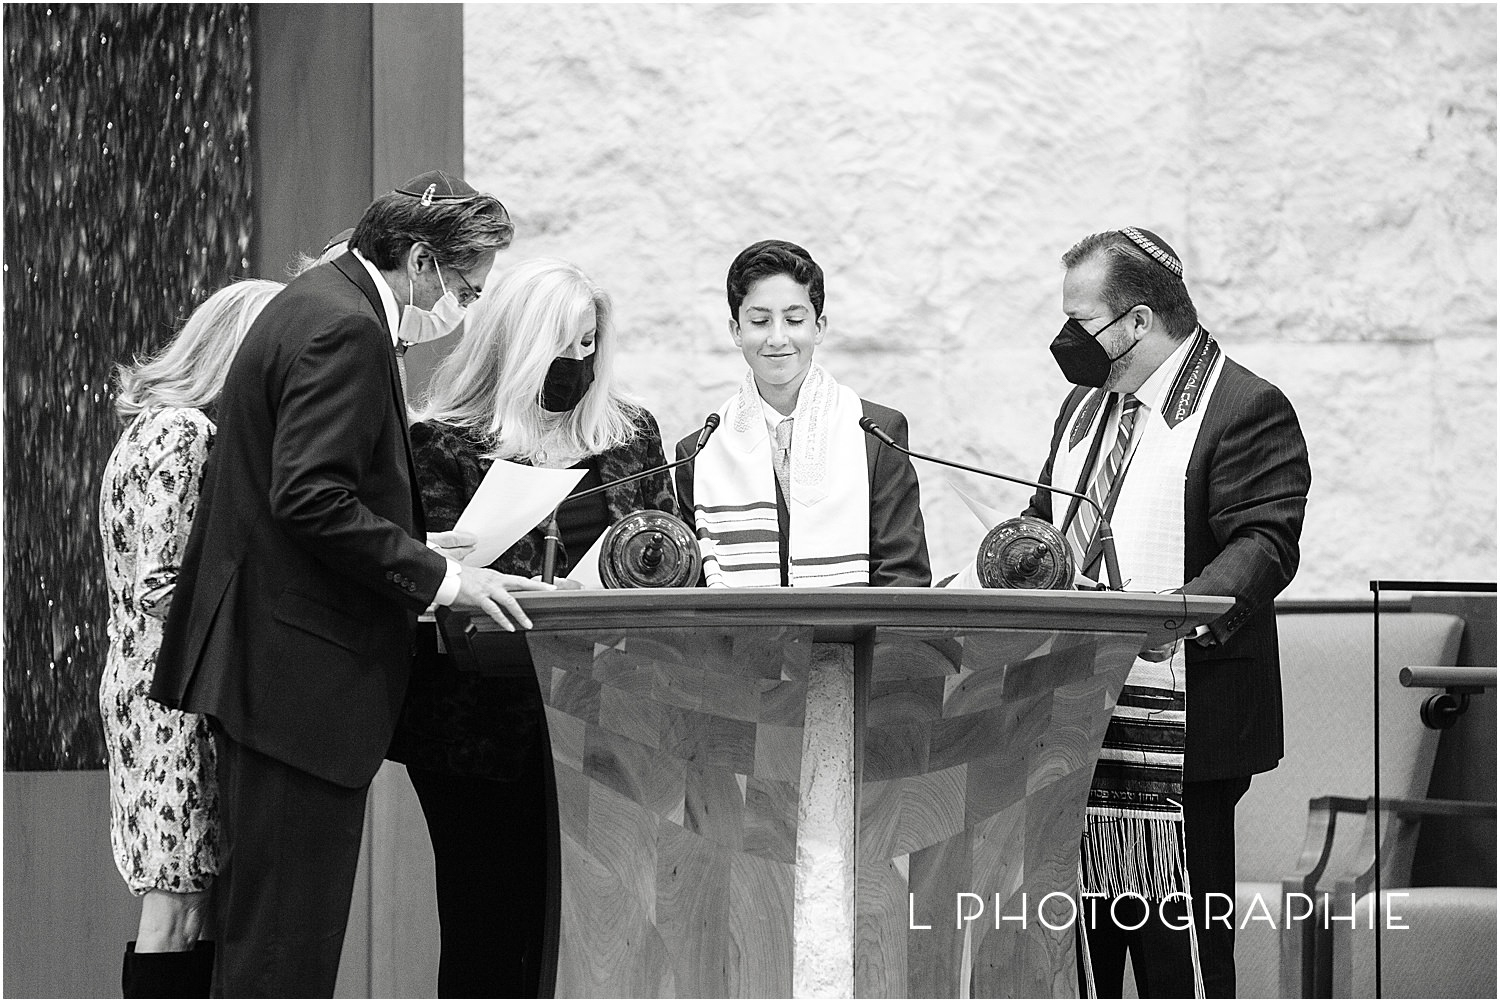 Jewish,L Photographie,L Photographie bar mitzvah,L Photographie bat mitzvah,L Photographie mitzvahs,Lester's Sports Bar,Meredith Marquardt,Shaare Emeth,Simcha's Events,St. Louis bar mitzvah photographer,St. Louis bat mitzvah photographer,Torah,Torah reading,bar mitzvah,bar mitzvah photographer,bat mitzvah,bat mitzvah photographer,best St. Louis mitzvah photographer,female photographer,mazel tov,milestone photos,mitzvah,mitzvah photographer in St. Louis,must be a Simcha event,sports,sports theme,teen,teen boy,teen party,